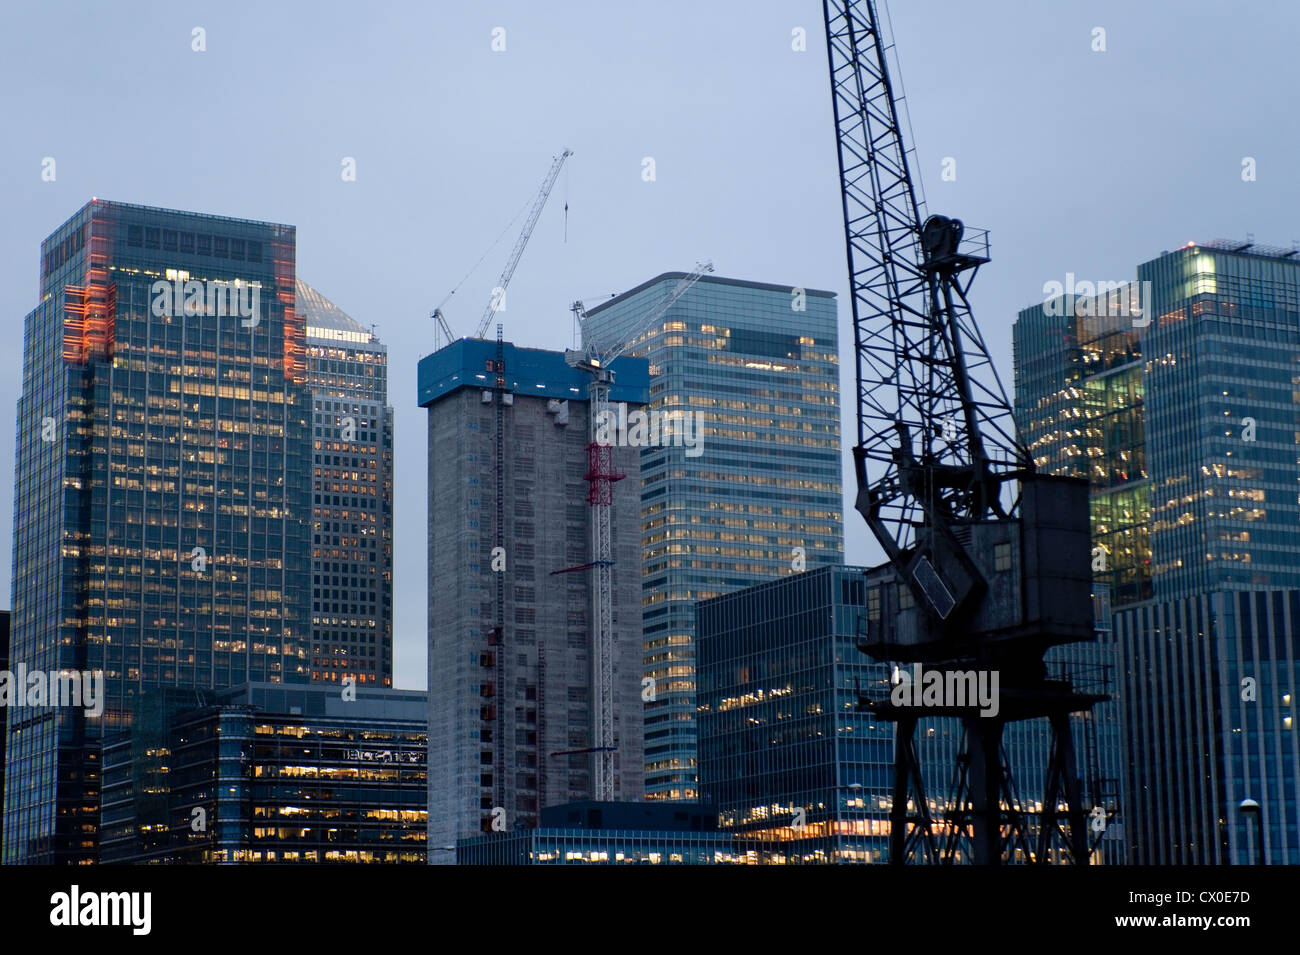 A view at dusk of the City of London skyscrapers with old dockland crane in foreground Stock Photo